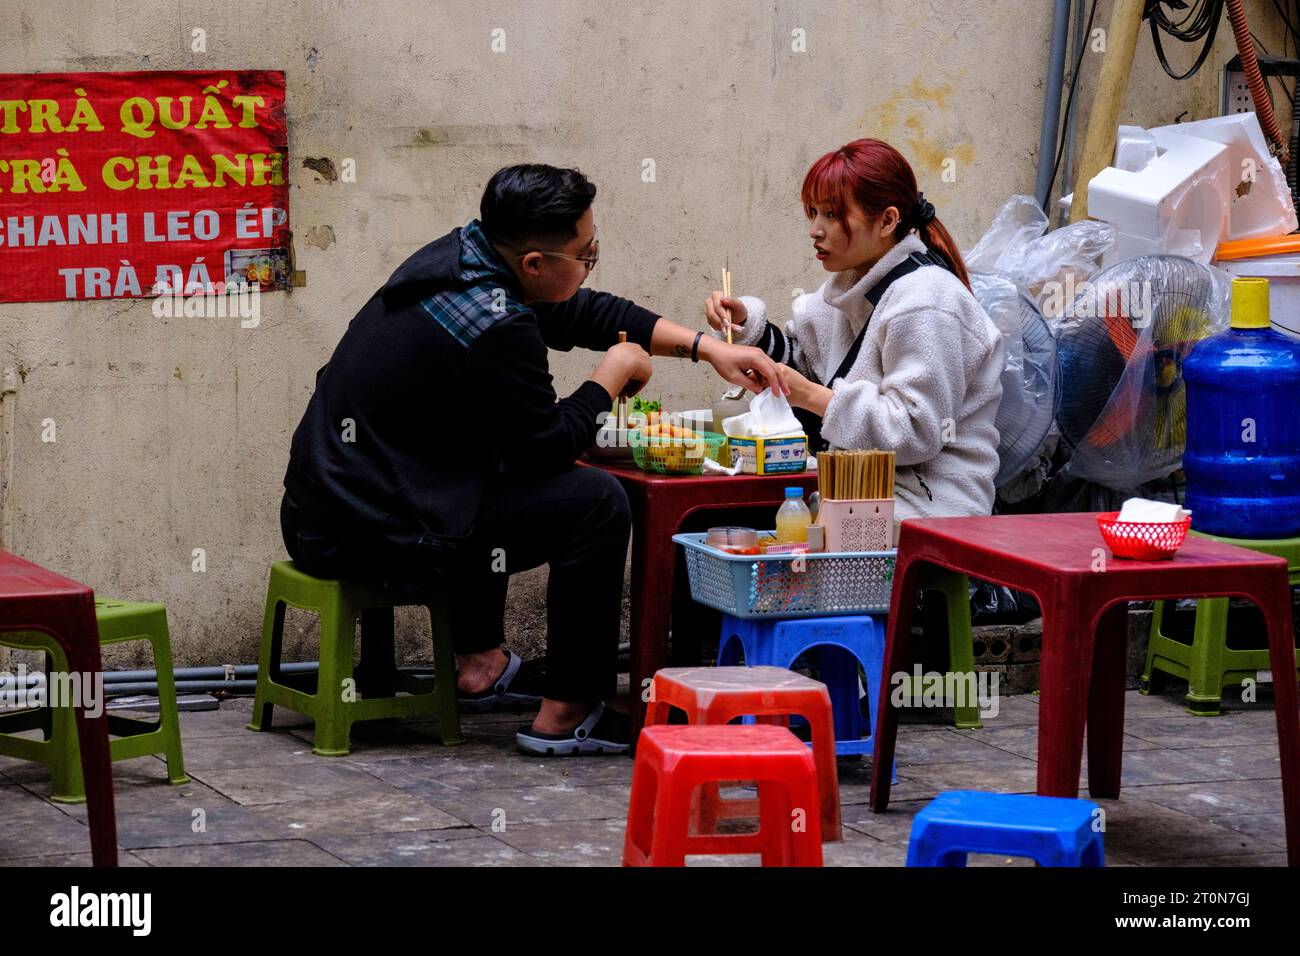 Hanoi, Vietnam. Couple Having Lunch at a Sidewalk Fast Food Stand. Stock Photo